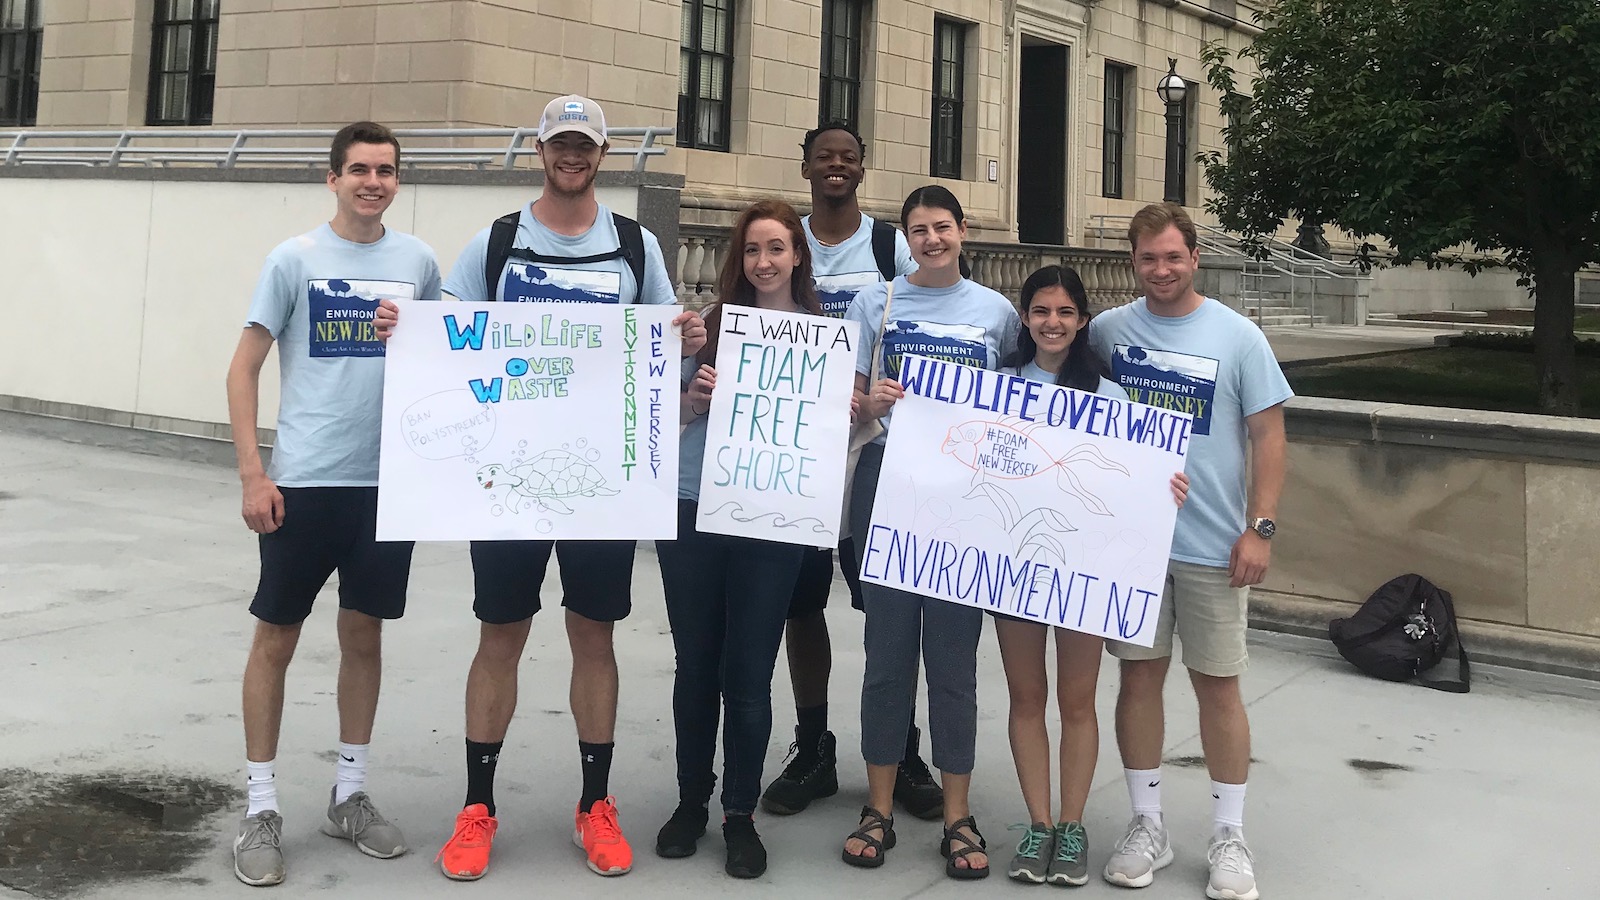 Environment New Jersey canvassers, pictured here during a lobby day at the New Jersey state house, knocked on doors in 2018 to build support for a polystyrene ban.